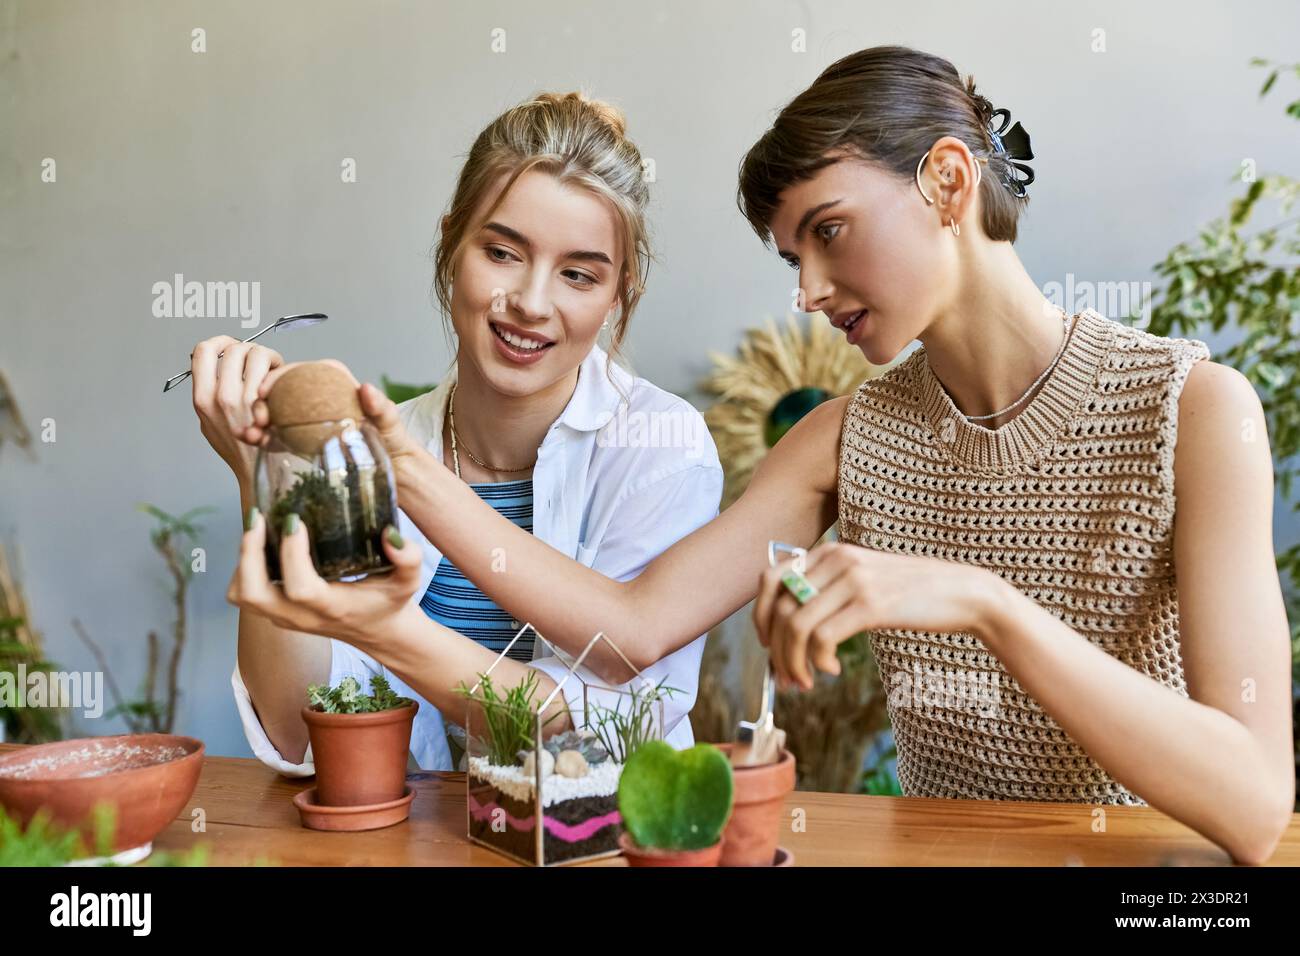 Two women admiring a potted plant together in an art studio. Stock Photo